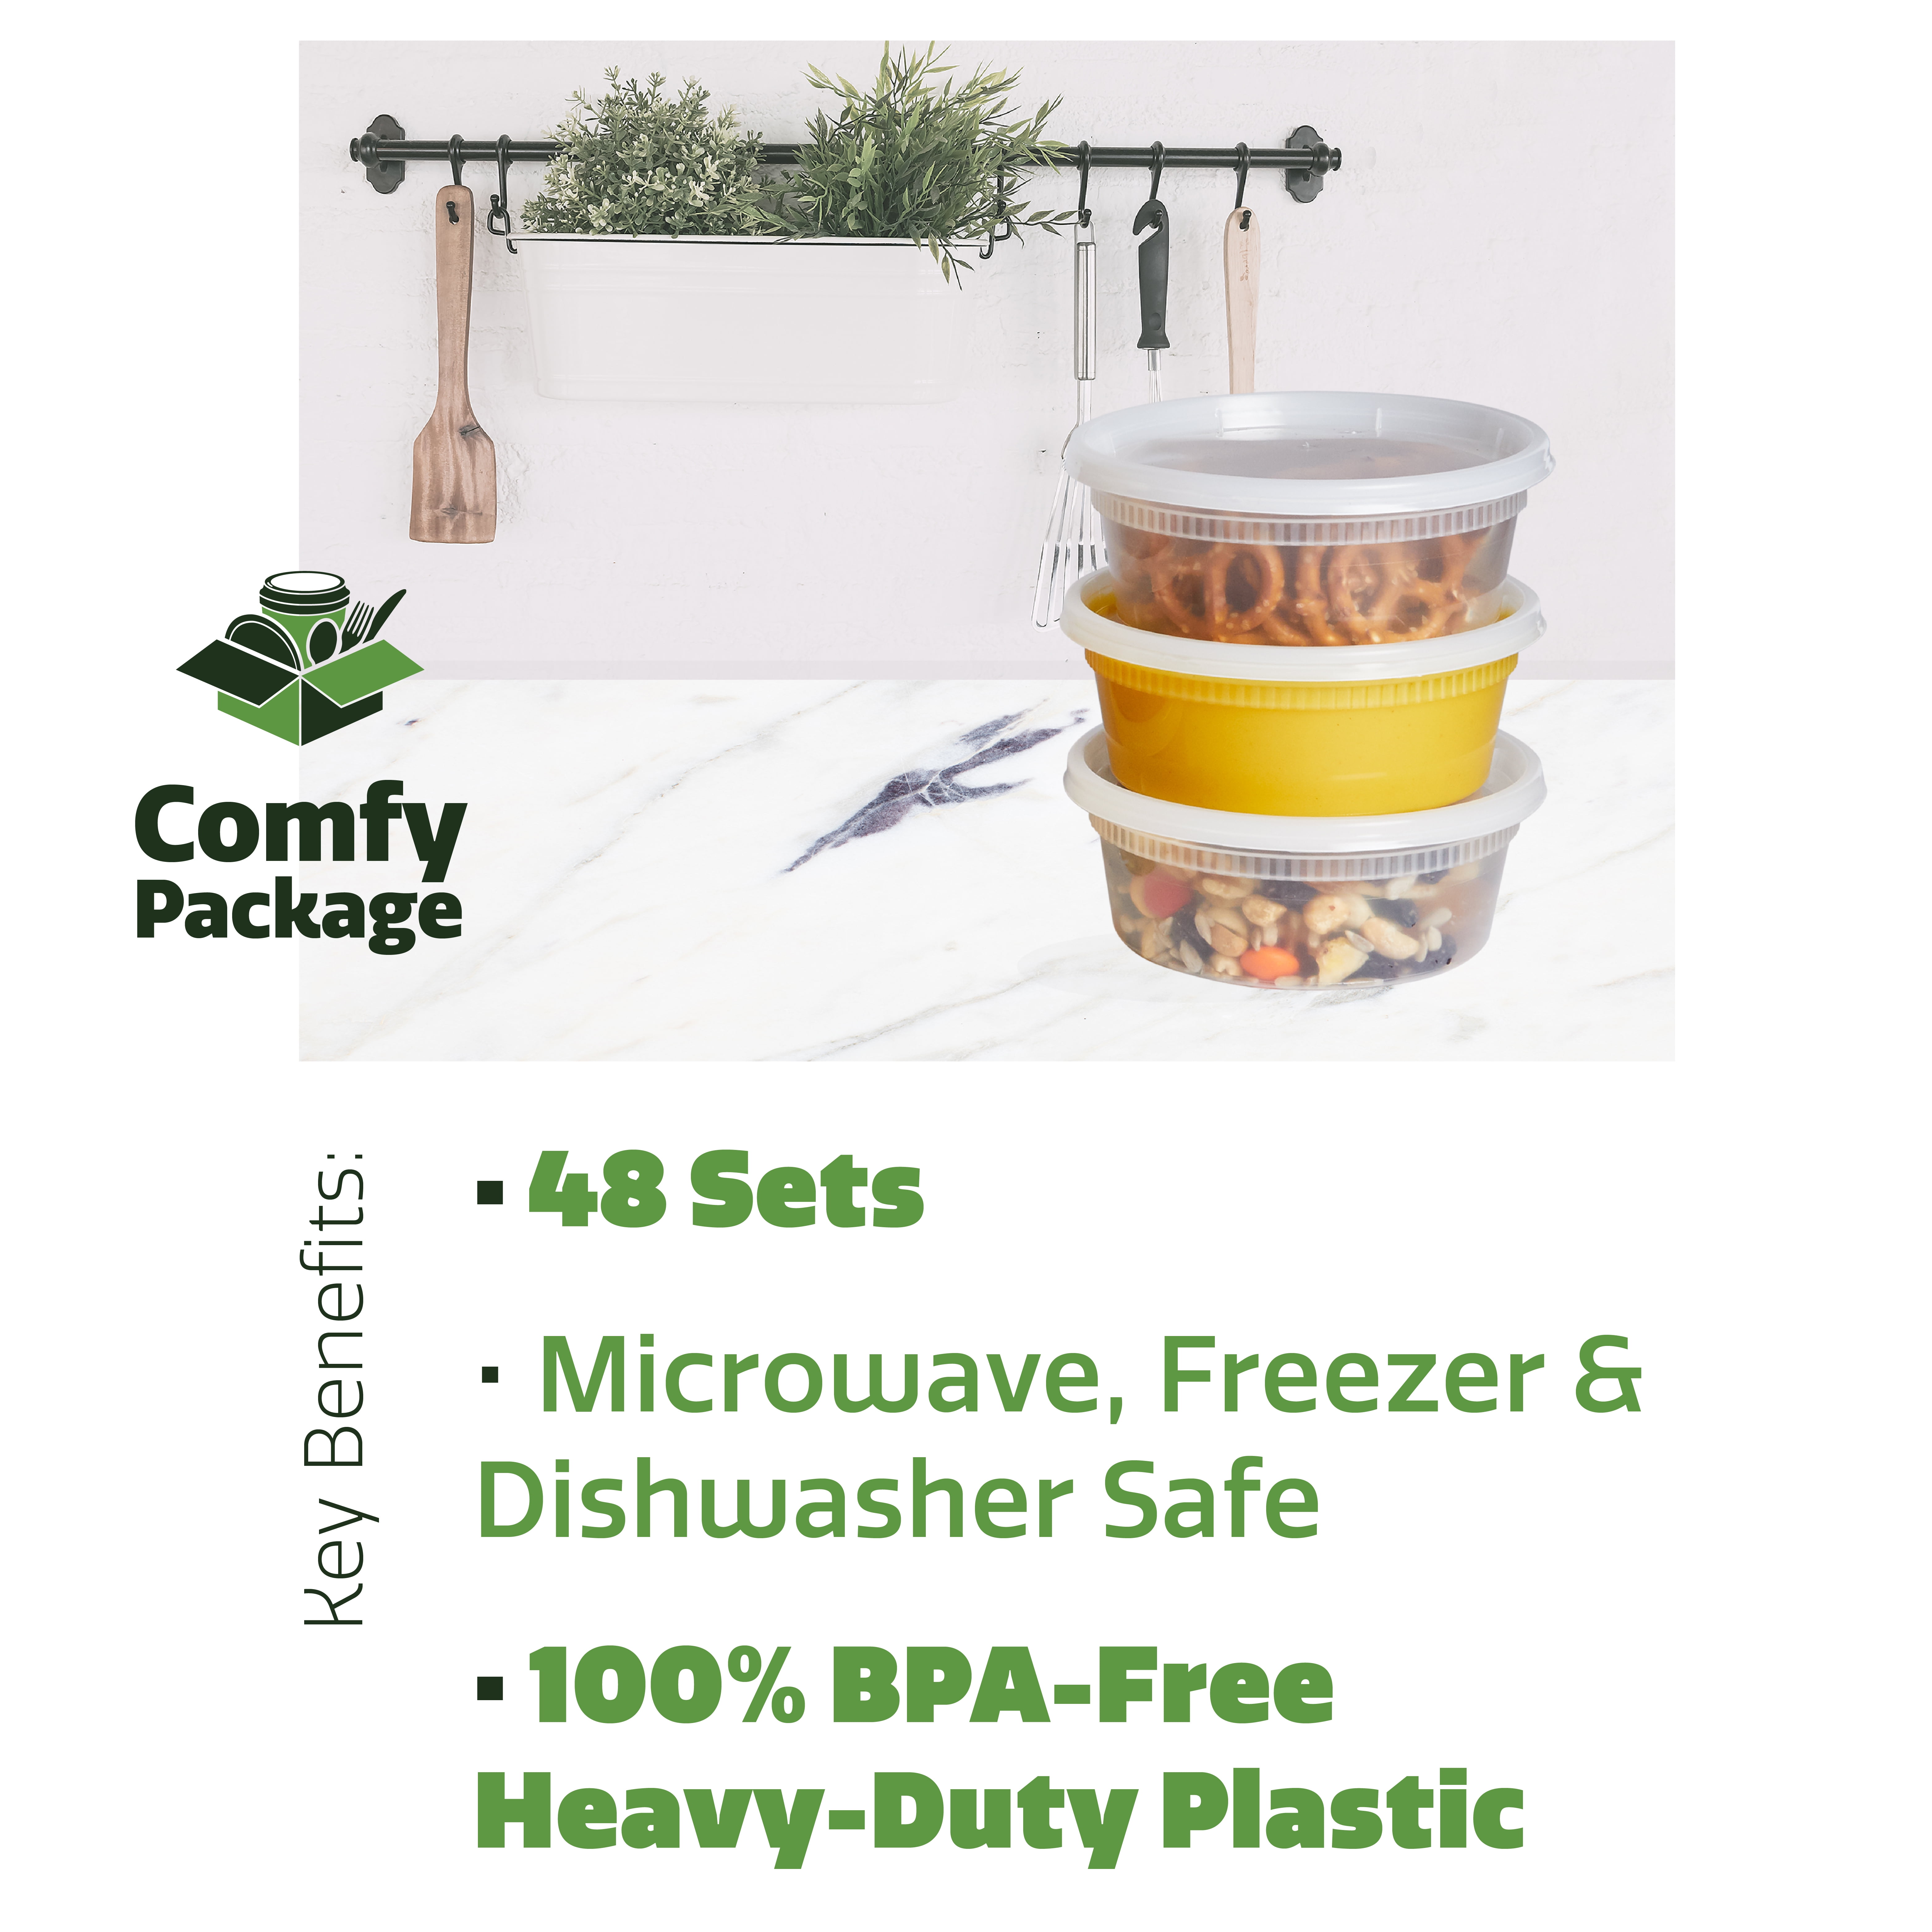 PAMI Deli Plastic Containers With Lids [48-Pack, 8oz] - Small Food